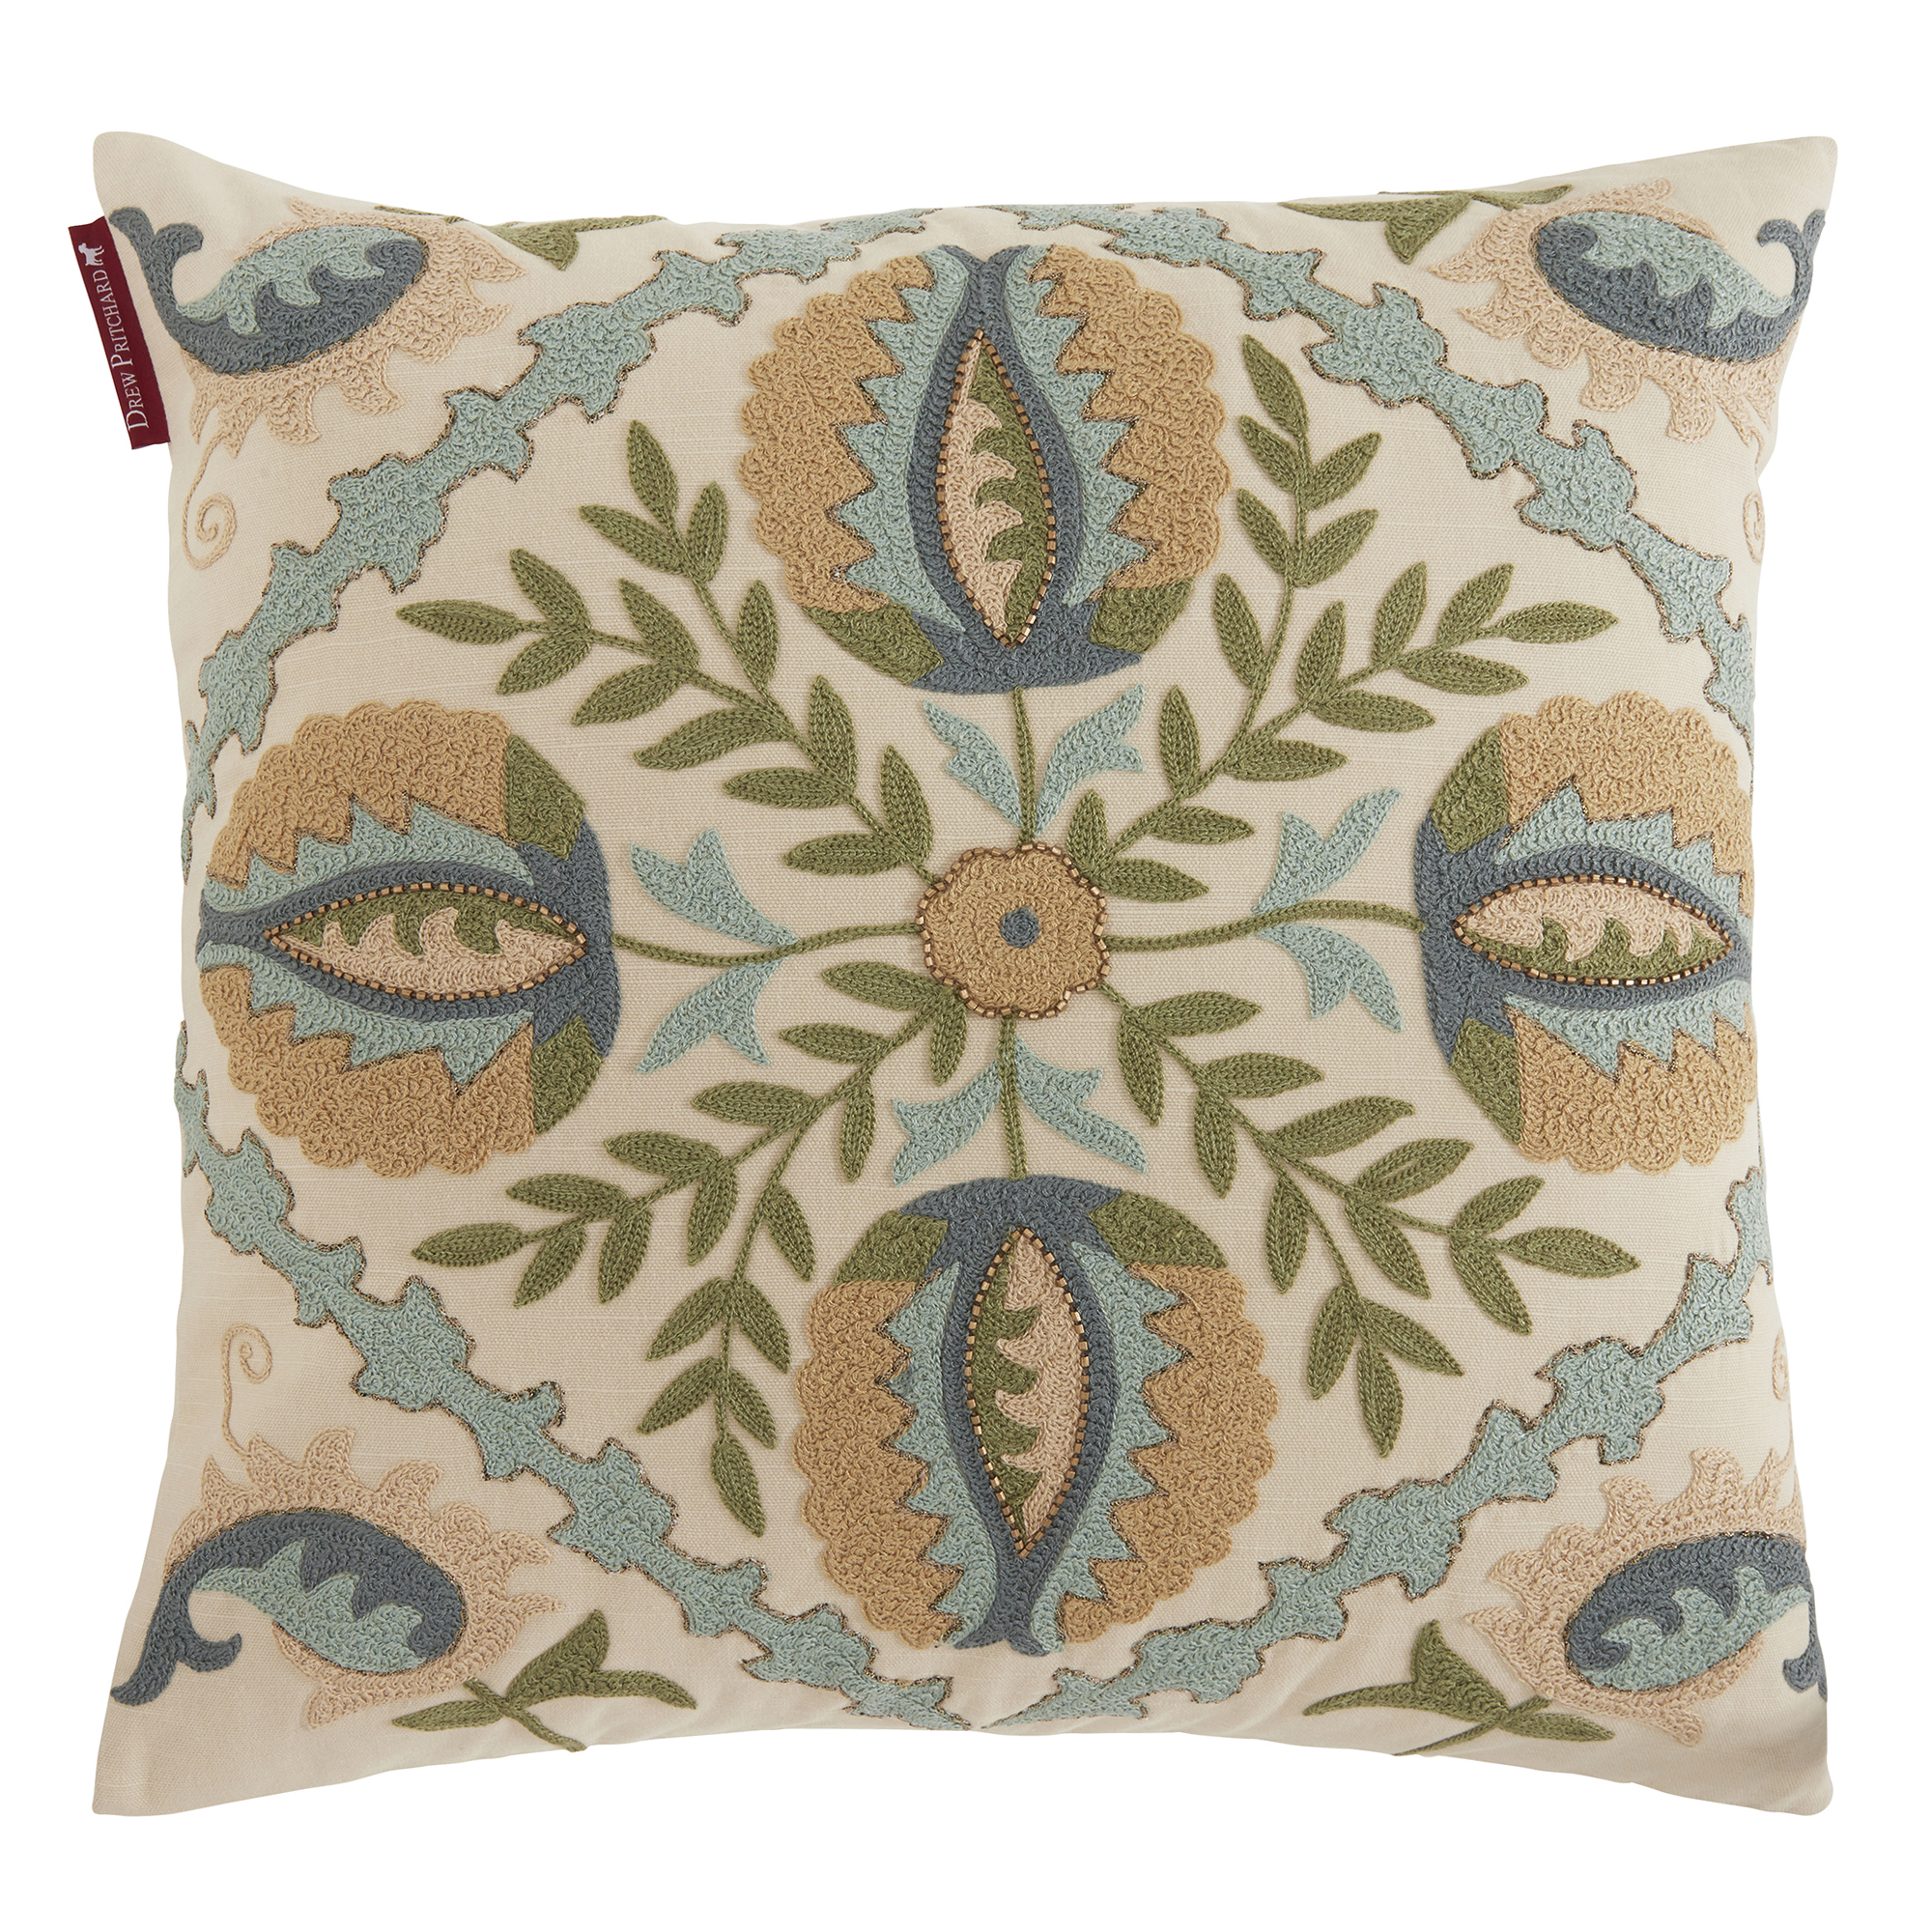 Embroided Chinosiere Cushion, Square, Neutral | Barker & Stonehouse